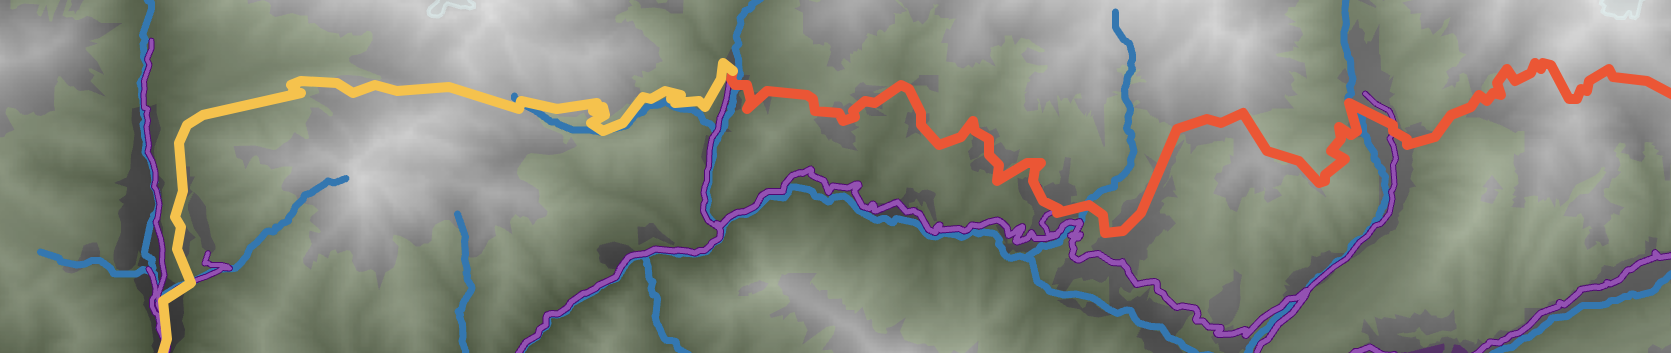 A short, wide screenshot of the interactive Transcaucasian Trail map, showing two sections of the trail in (one red, one orange), as well as roads (purple) and rivers (blue) on a white-to-black hypsometric basemap, with vegetation shown as a transparent green overlay.